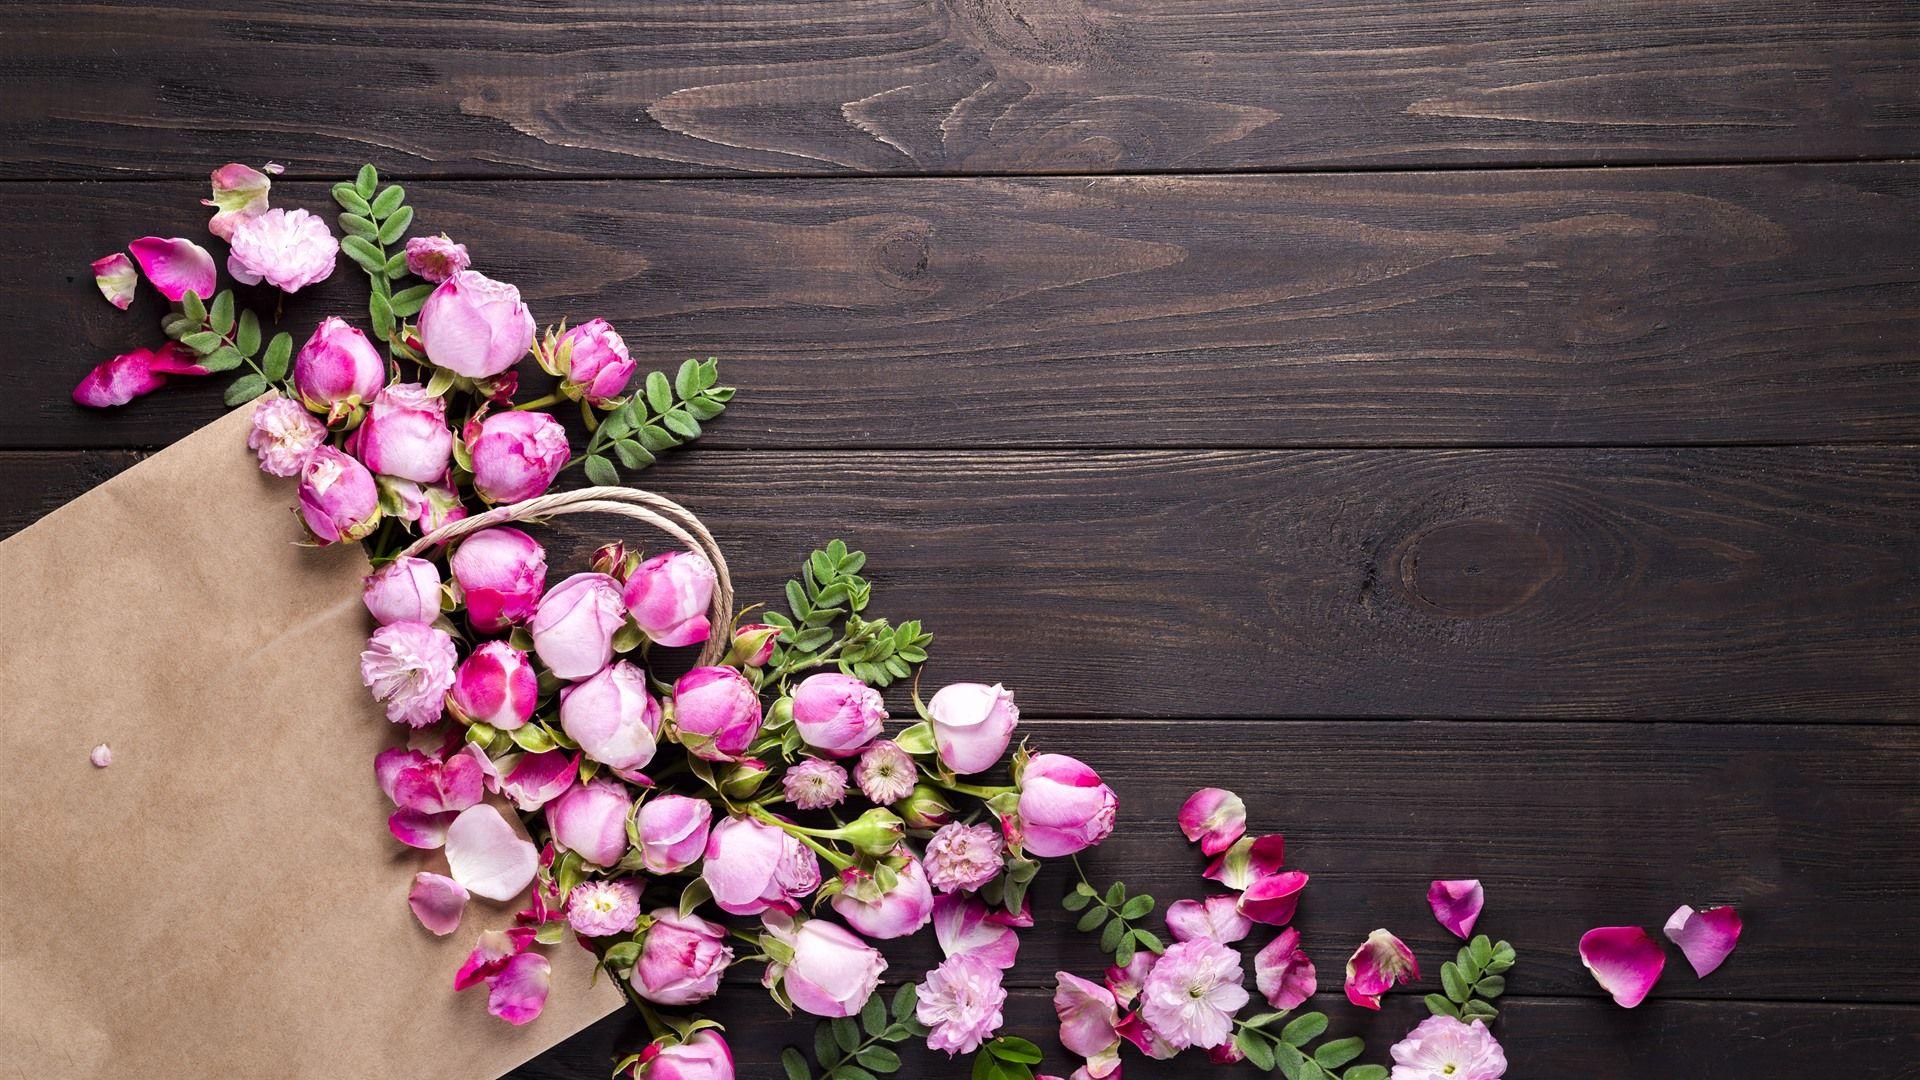 garden flowers over wooden background  Beautiful wallpapers Backdrops  Phone wallpaper